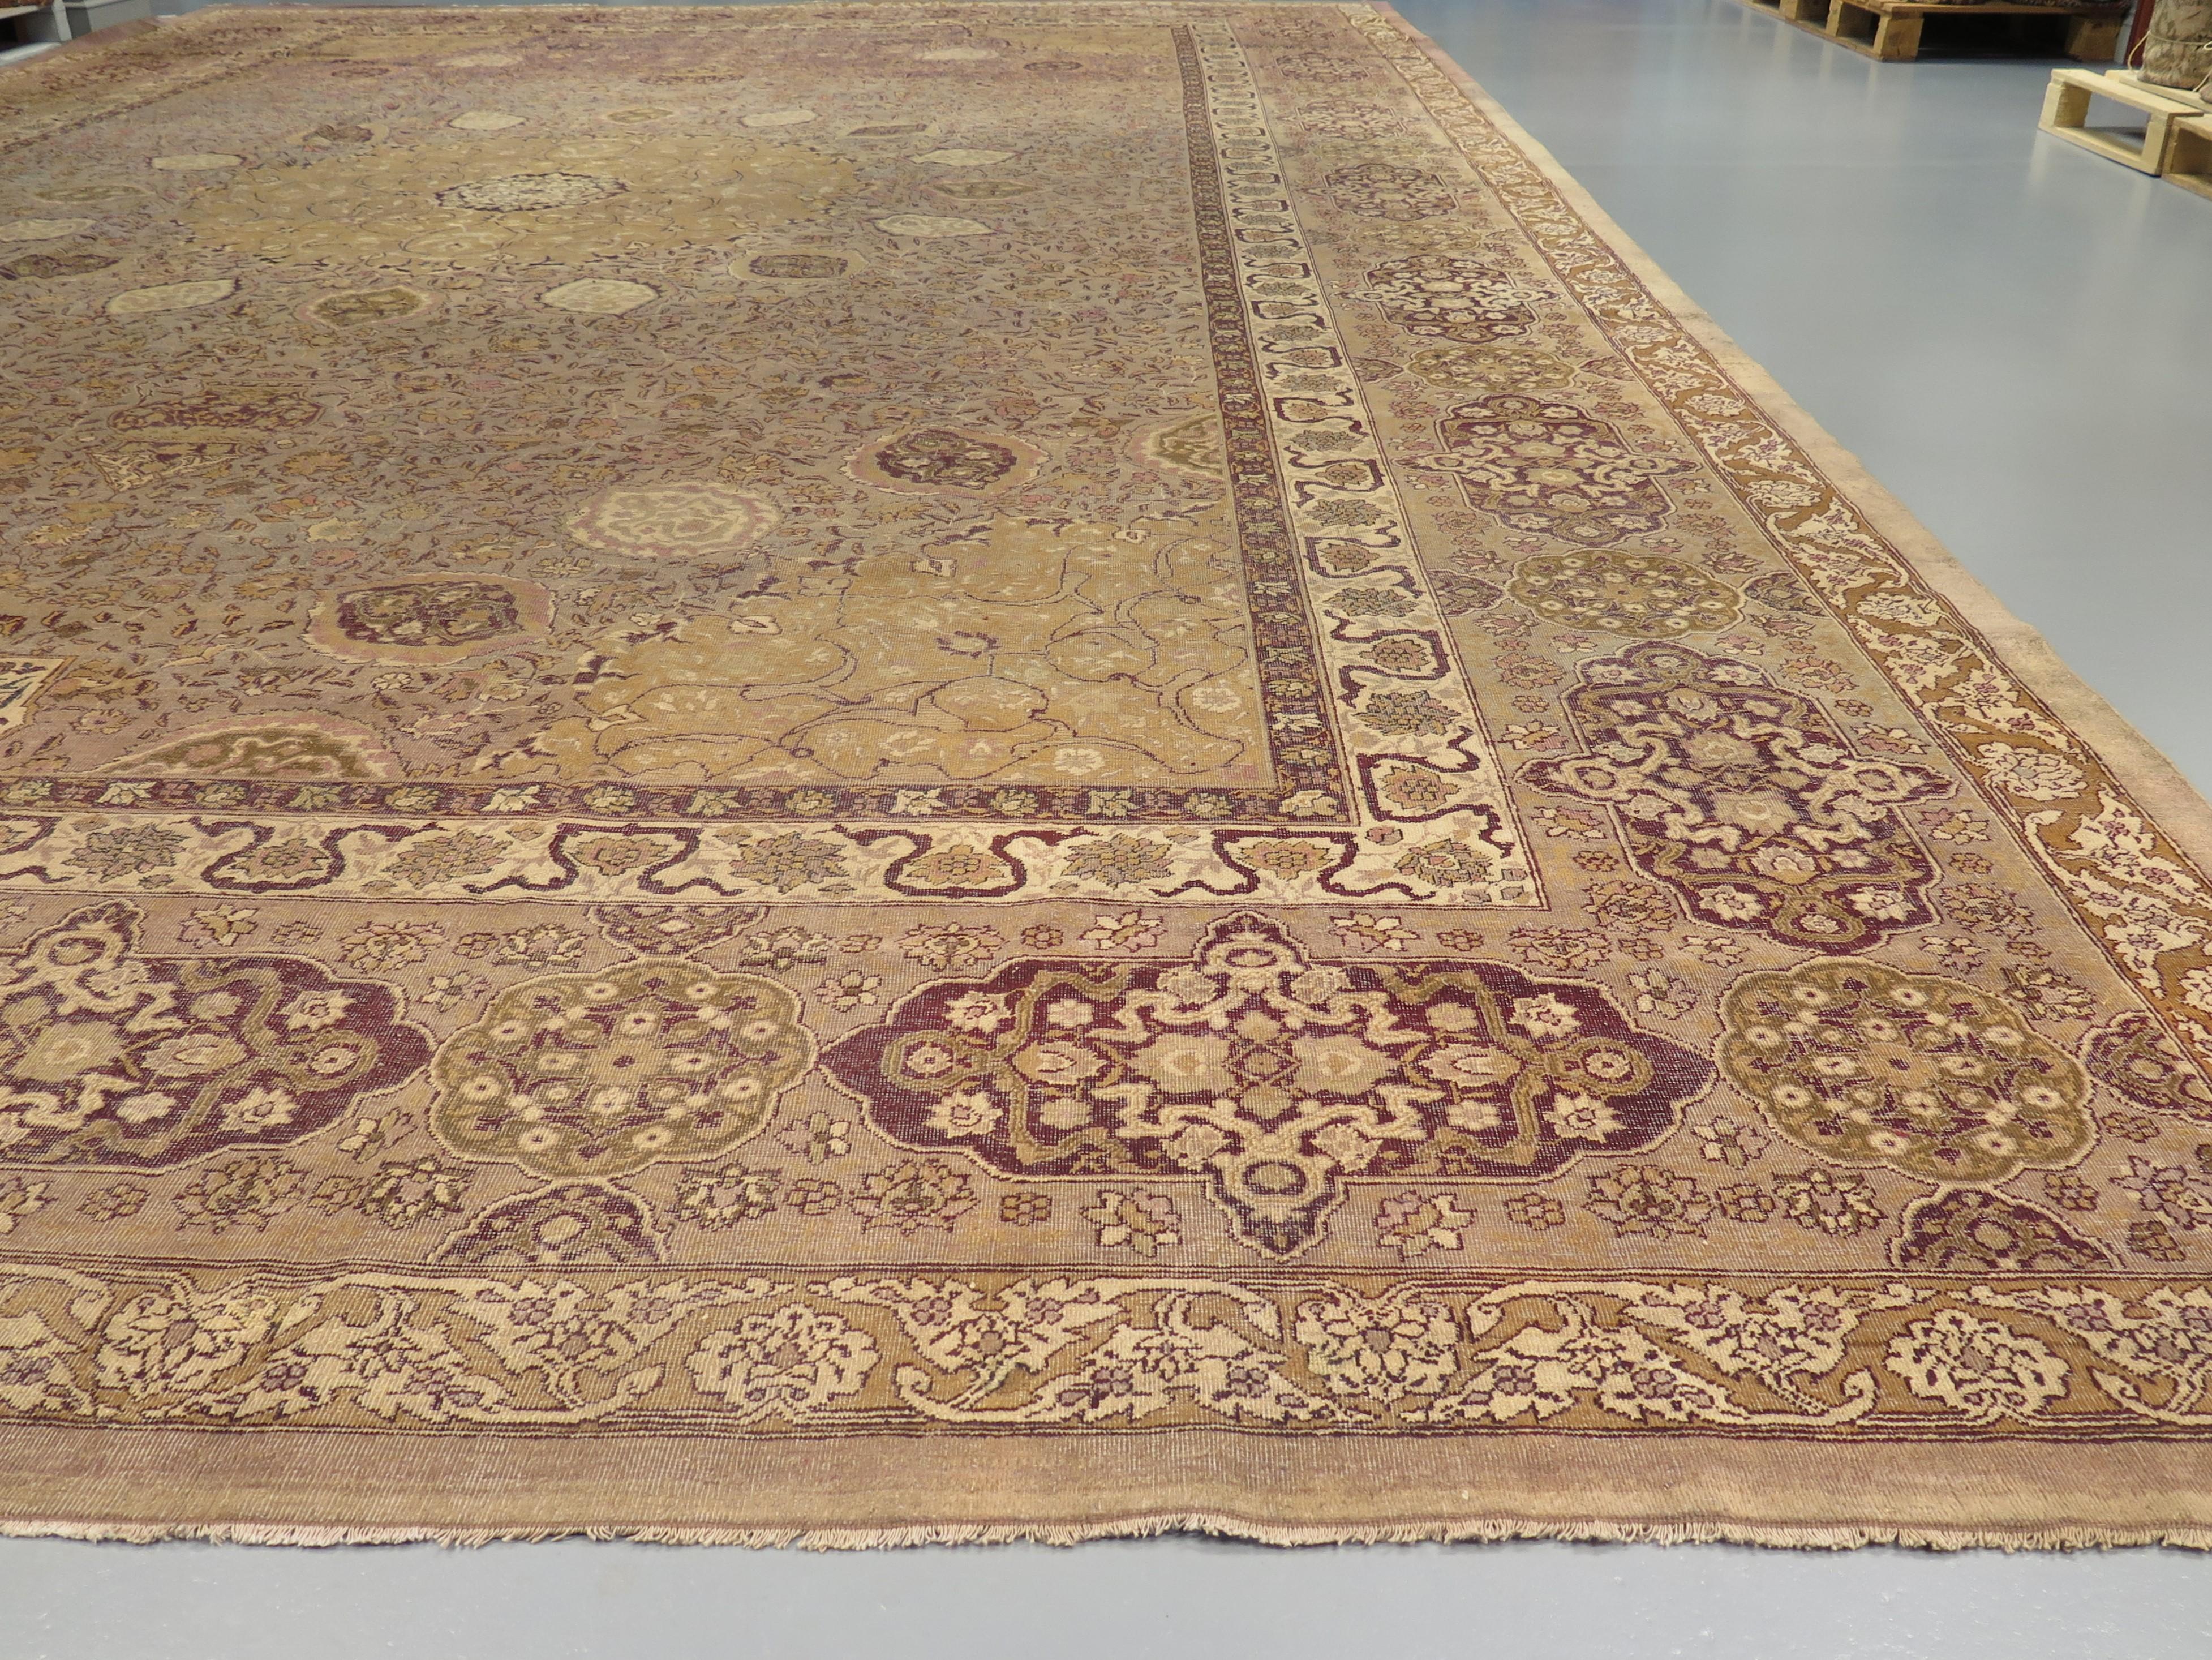 Rug creation in India has a venerable history, stretching back to the 16th-century Mughal period, but experienced a real renaissance in Amritsar during the late 19th century under the auspices of British colonial rule. Amritsar carpets derived their